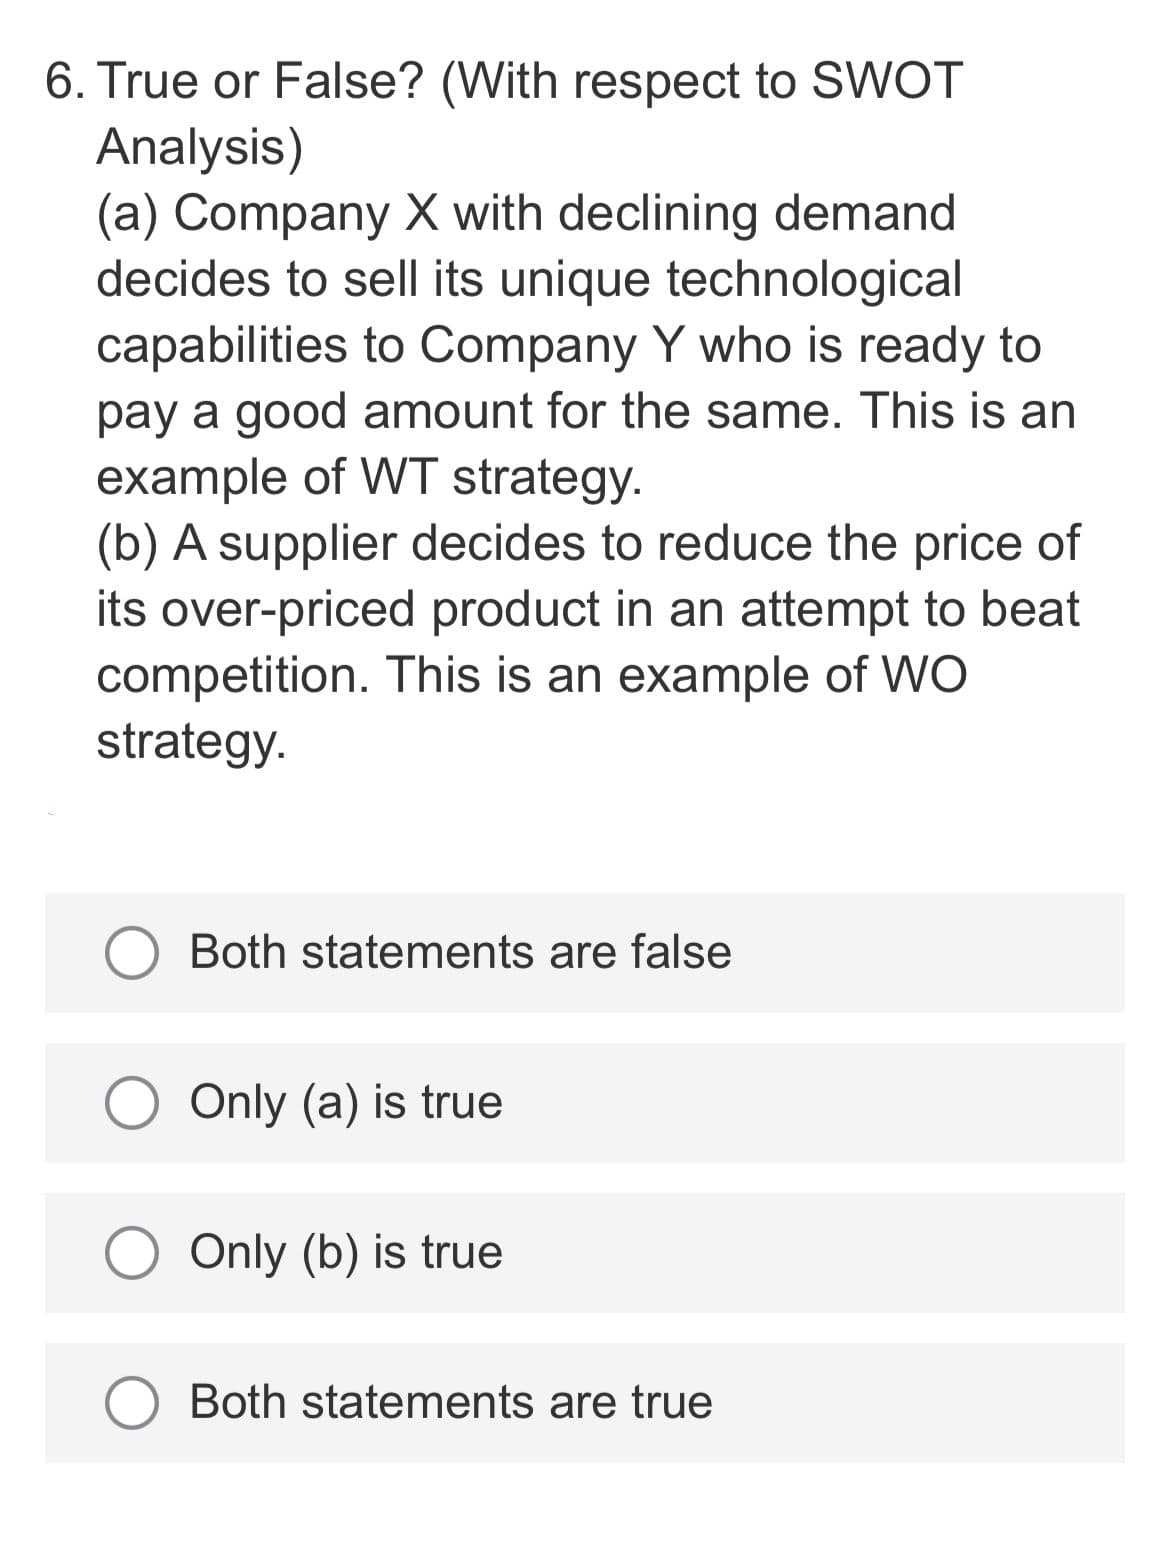 6. True or False? (With respect to SWOT
Analysis)
(a) Company X with declining demand
decides to sell its unique technological
capabilities to Company Y who is ready to
pay a good amount for the same. This is an
example of WT strategy.
(b) A supplier decides to reduce the price of
its over-priced product in an attempt to beat
competition. This is an example of WO
strategy.
Both statements are false
Only (a) is true
O Only (b) is true
Both statements are true
